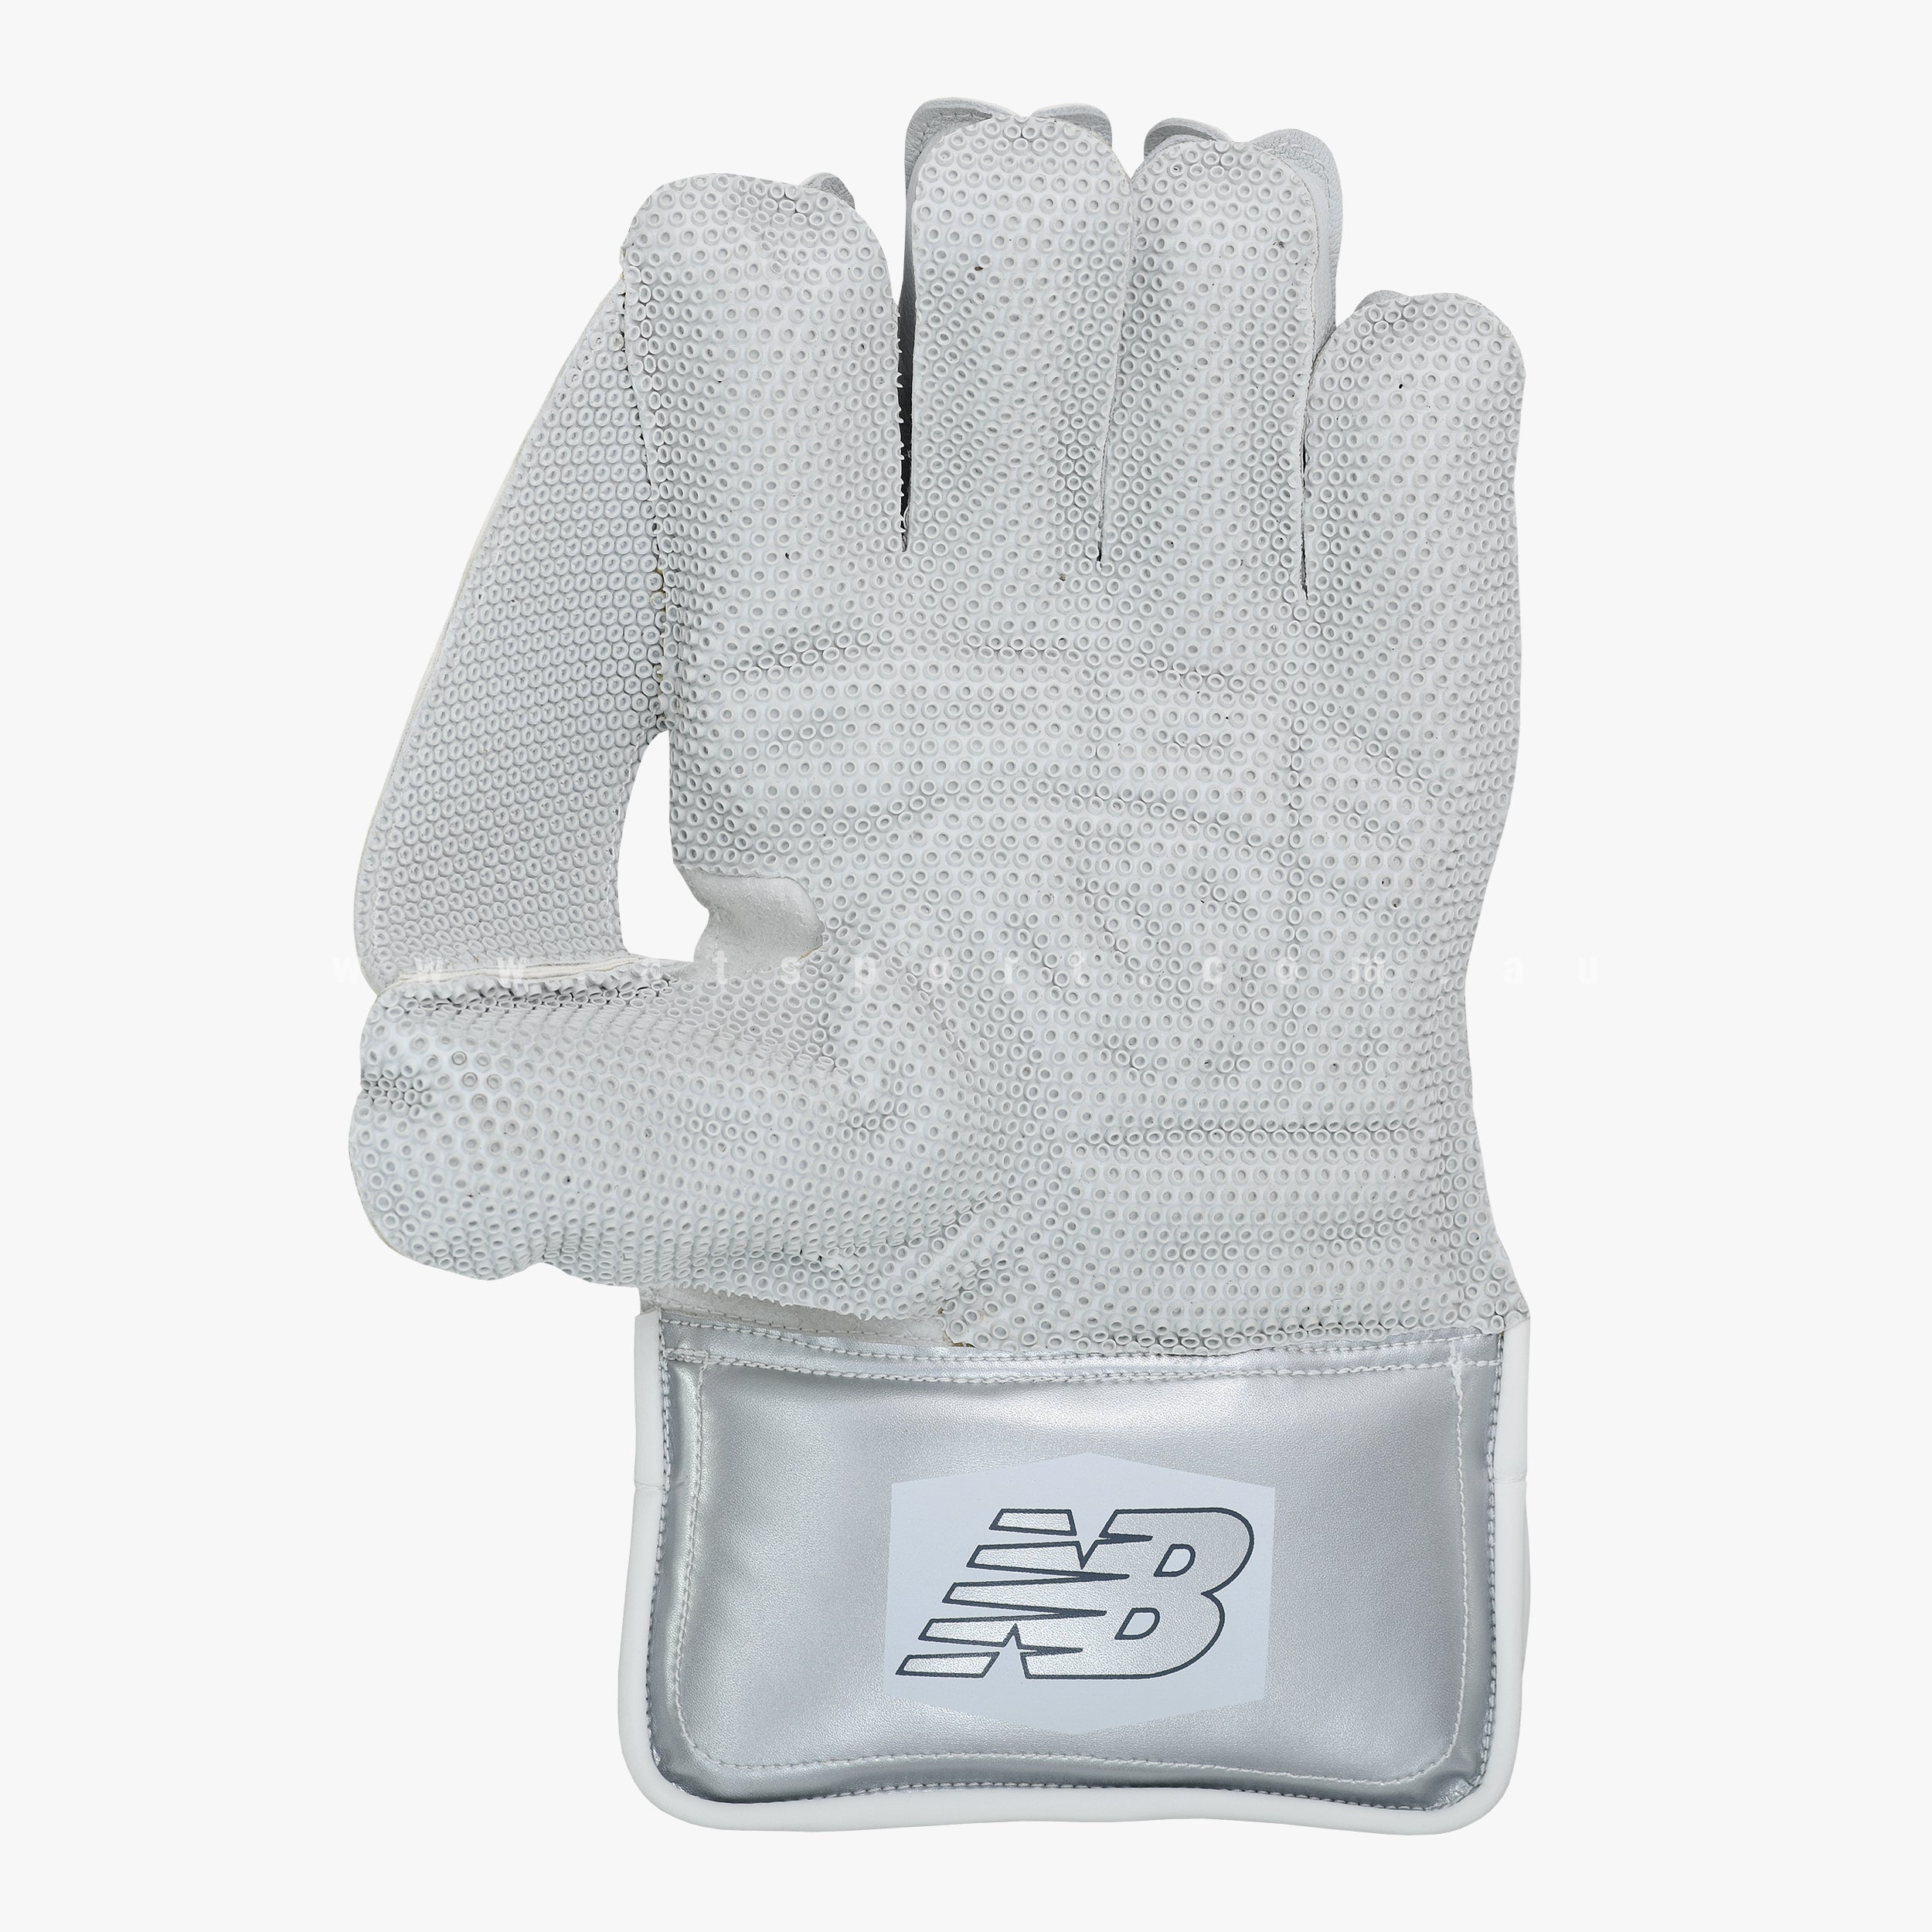 New Balance DC 580 Wicket Keeping Gloves - YOUTH